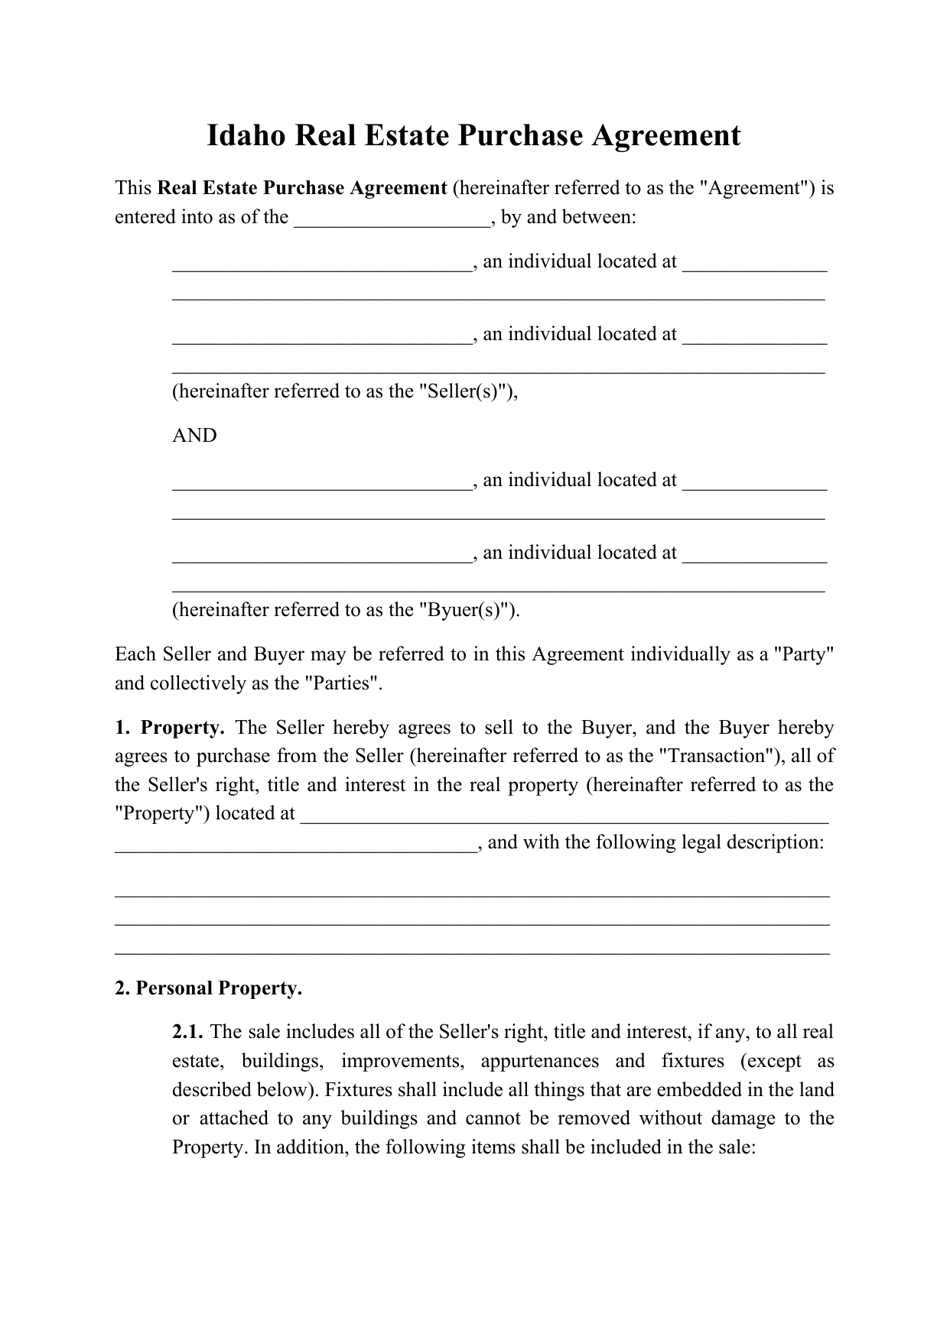 Real Estate Purchase Agreement Template - Idaho, Page 1